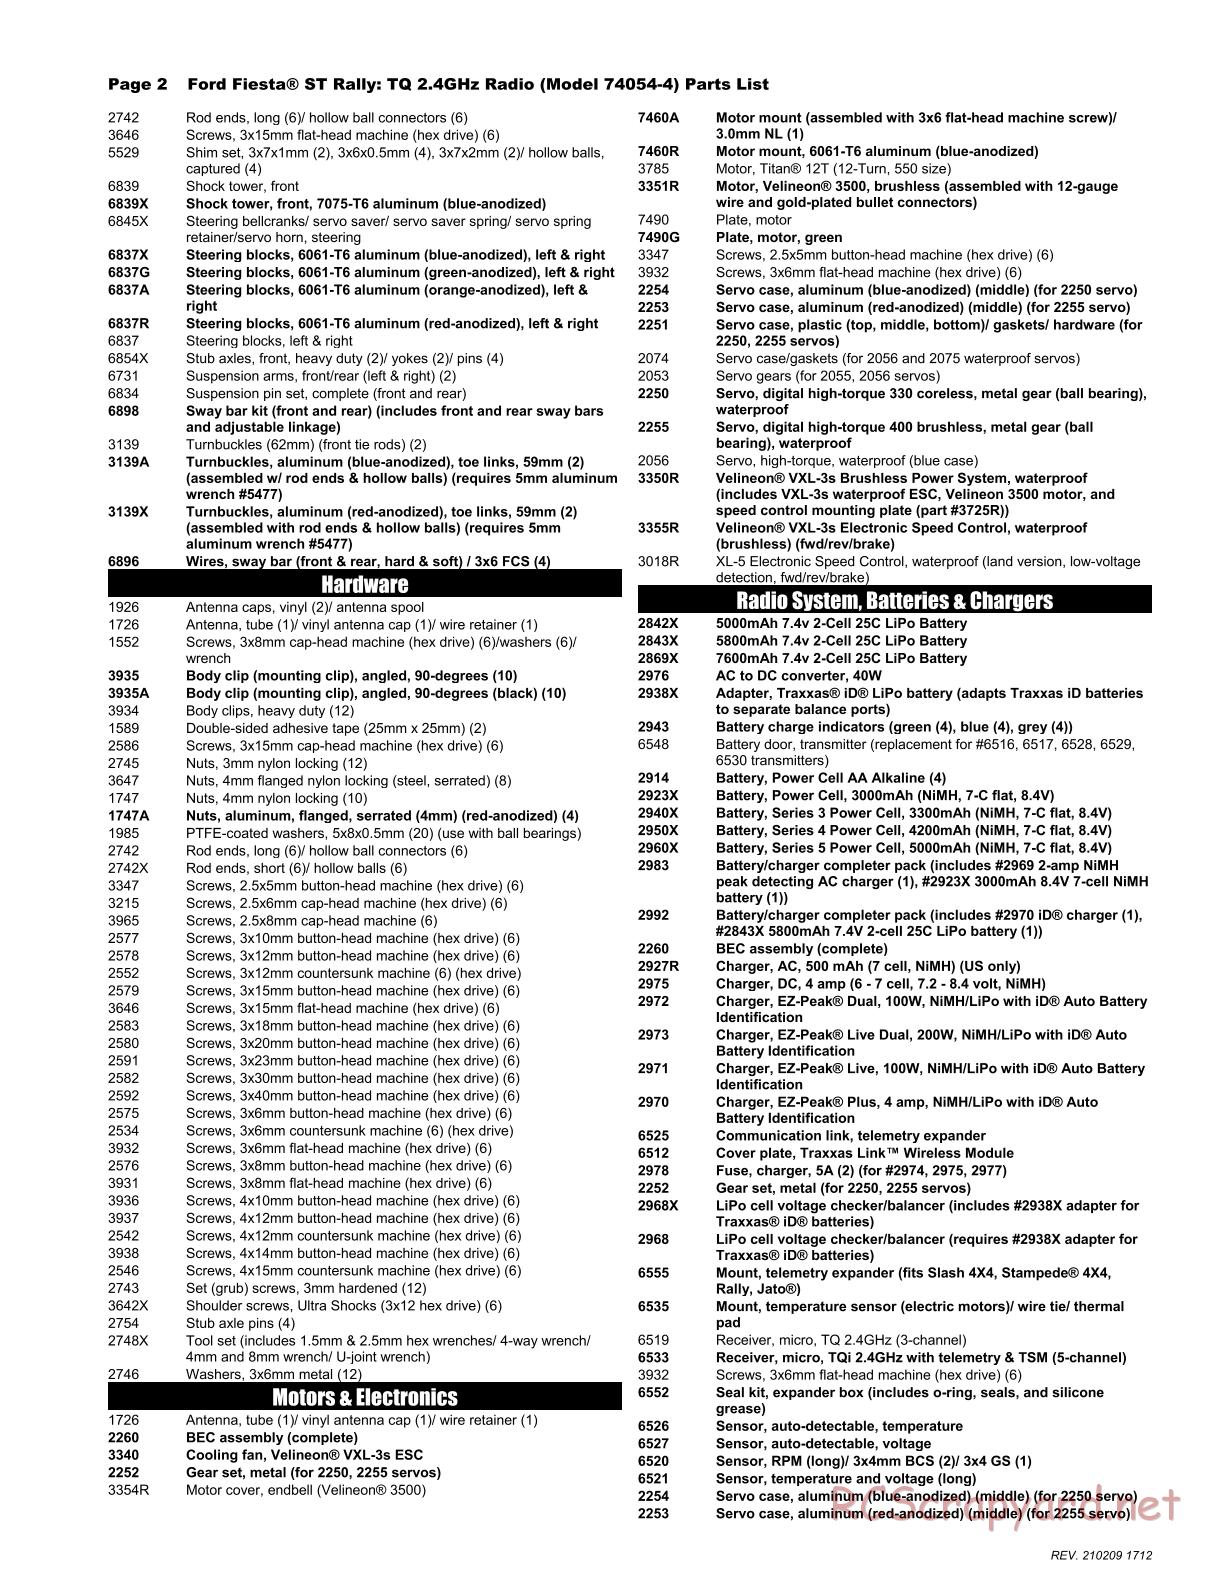 Traxxas - Ford Fiesta ST Rally - Parts List - Page 2